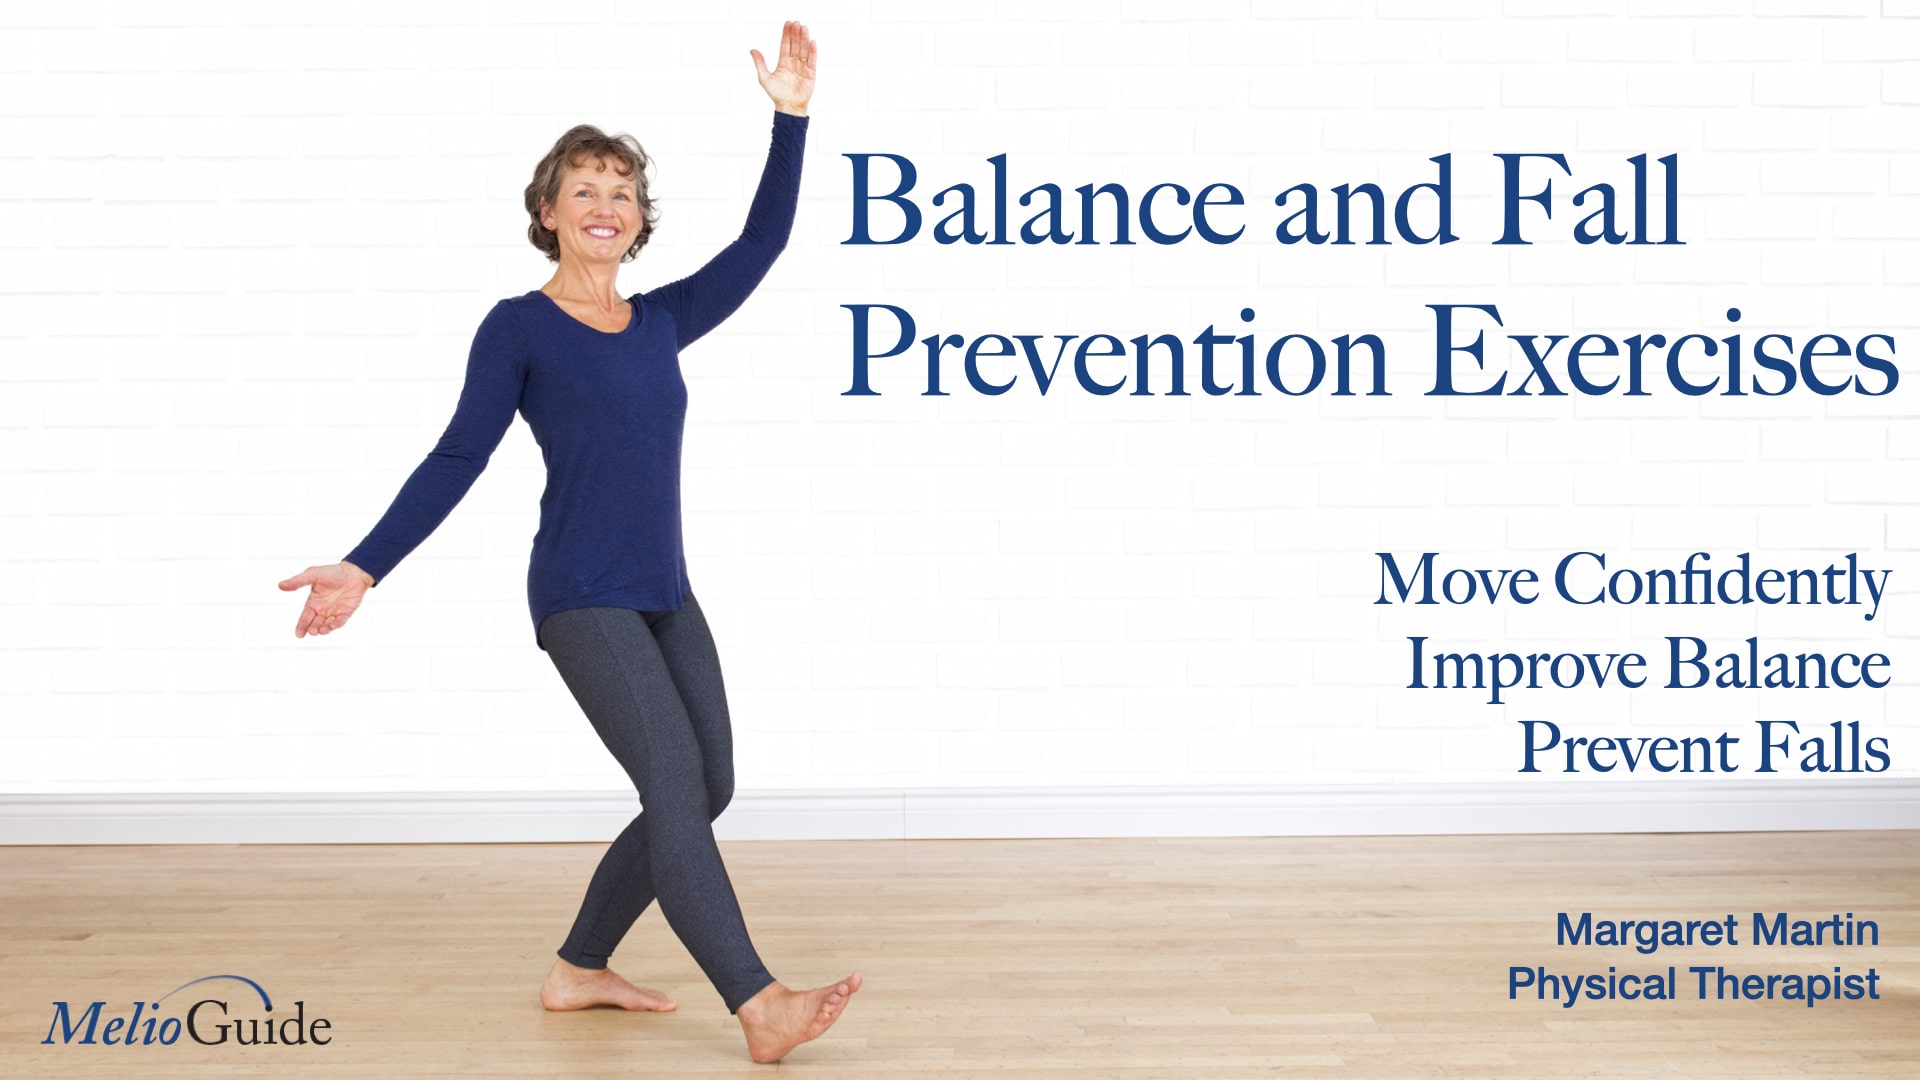 Balance Training Exercises Video Workouts For Fall Prevention